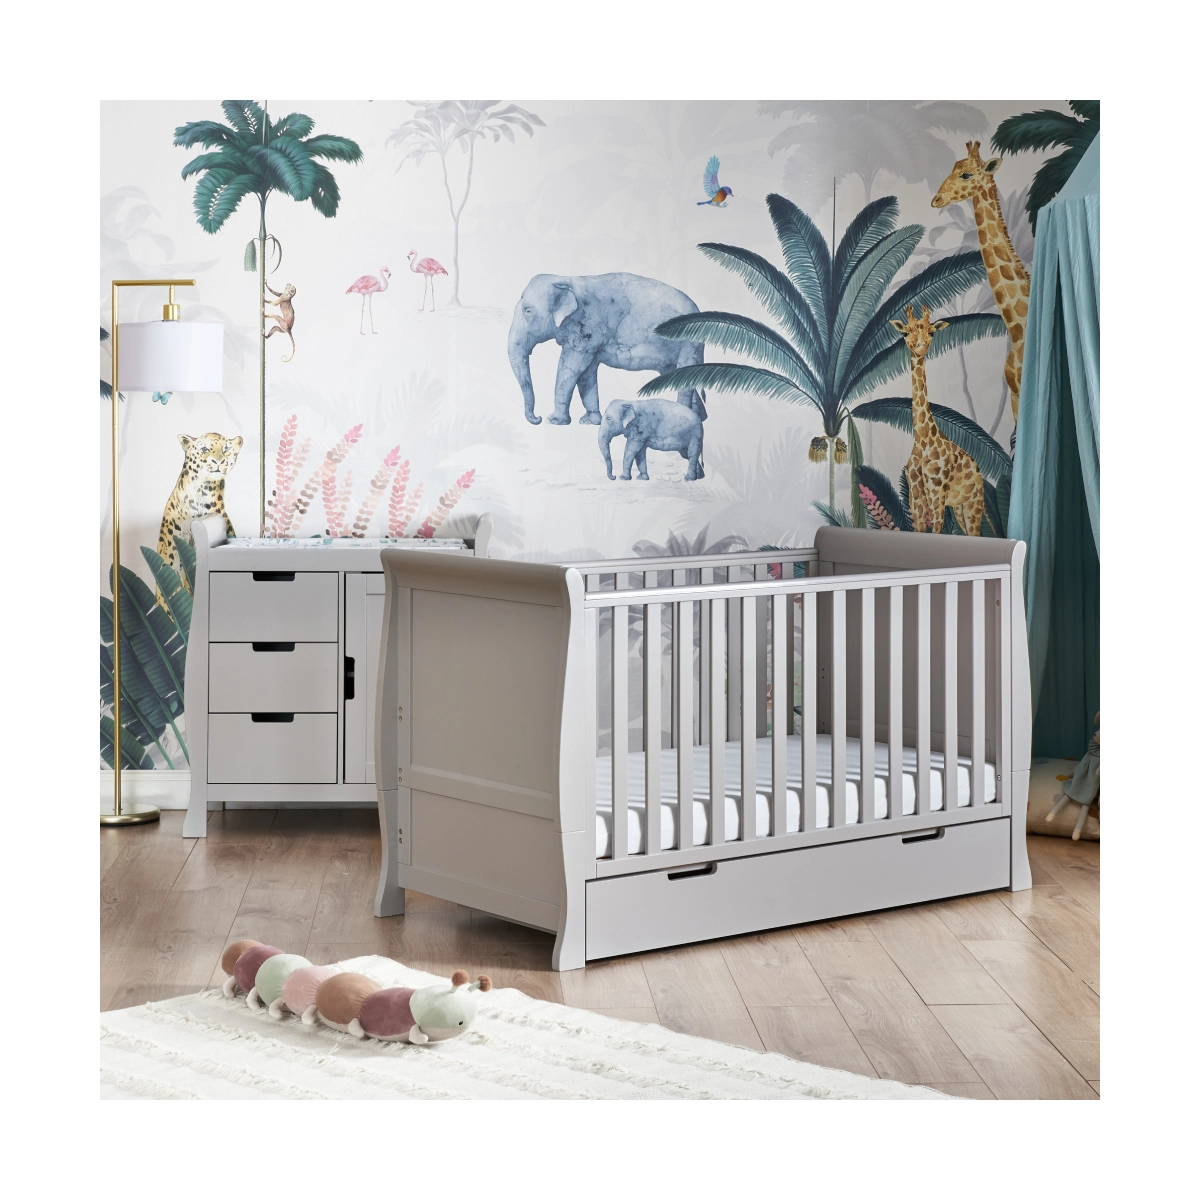 Image of Obaby Stamford Classic Sleigh 2 Piece Furniture Roomset with Underdrawer-Warm Grey